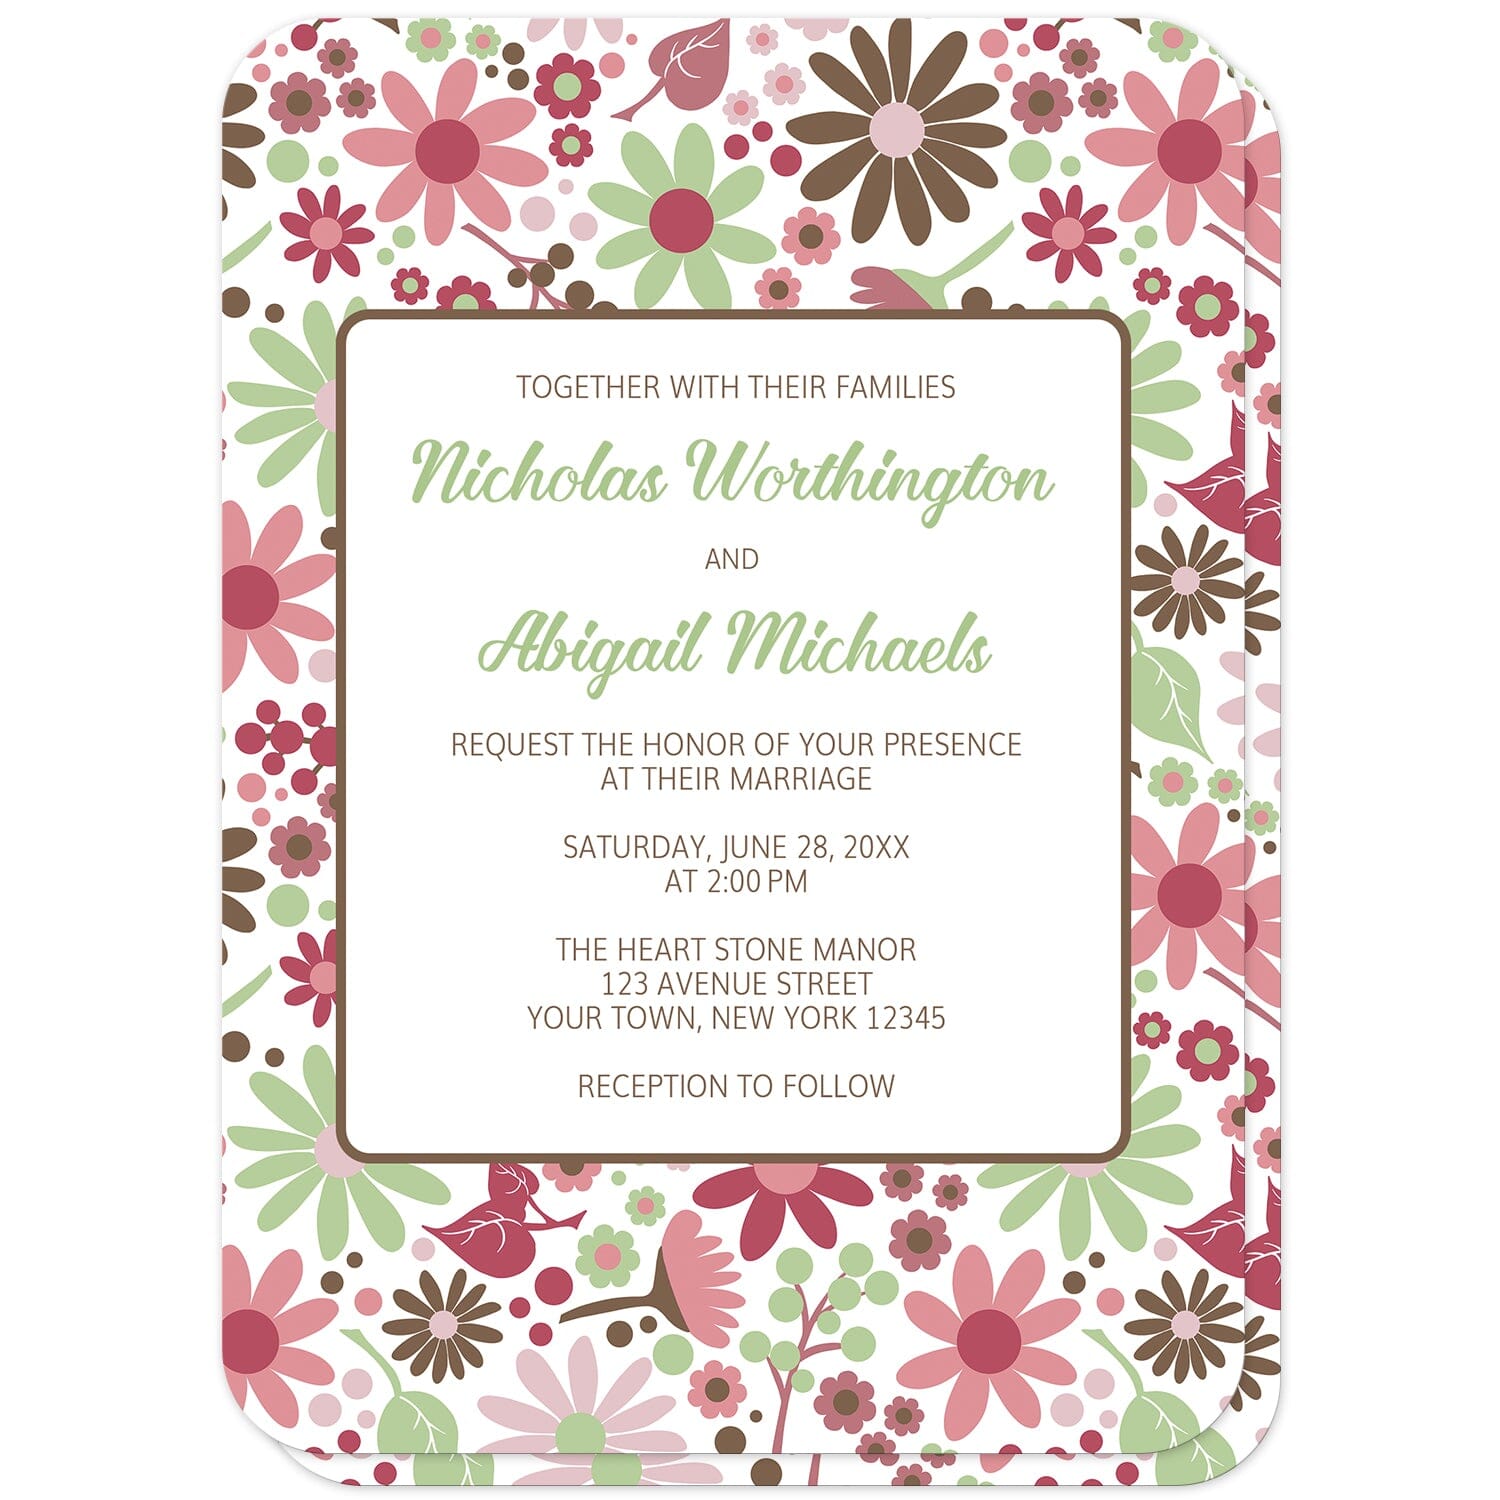 Berry Green Summer Flowers Wedding Invitations (front with rounded corners) at Artistically Invited. Beautiful berry green summer flowers wedding invitations designed with a pretty summer floral pattern in different hues of berry pink with green and brown. Personalize these invitations with your marriage occasion details. They're a gorgeous option for any couple who loves floral designs as they're covered in this flowers pattern on both the front and back of the invitations. 